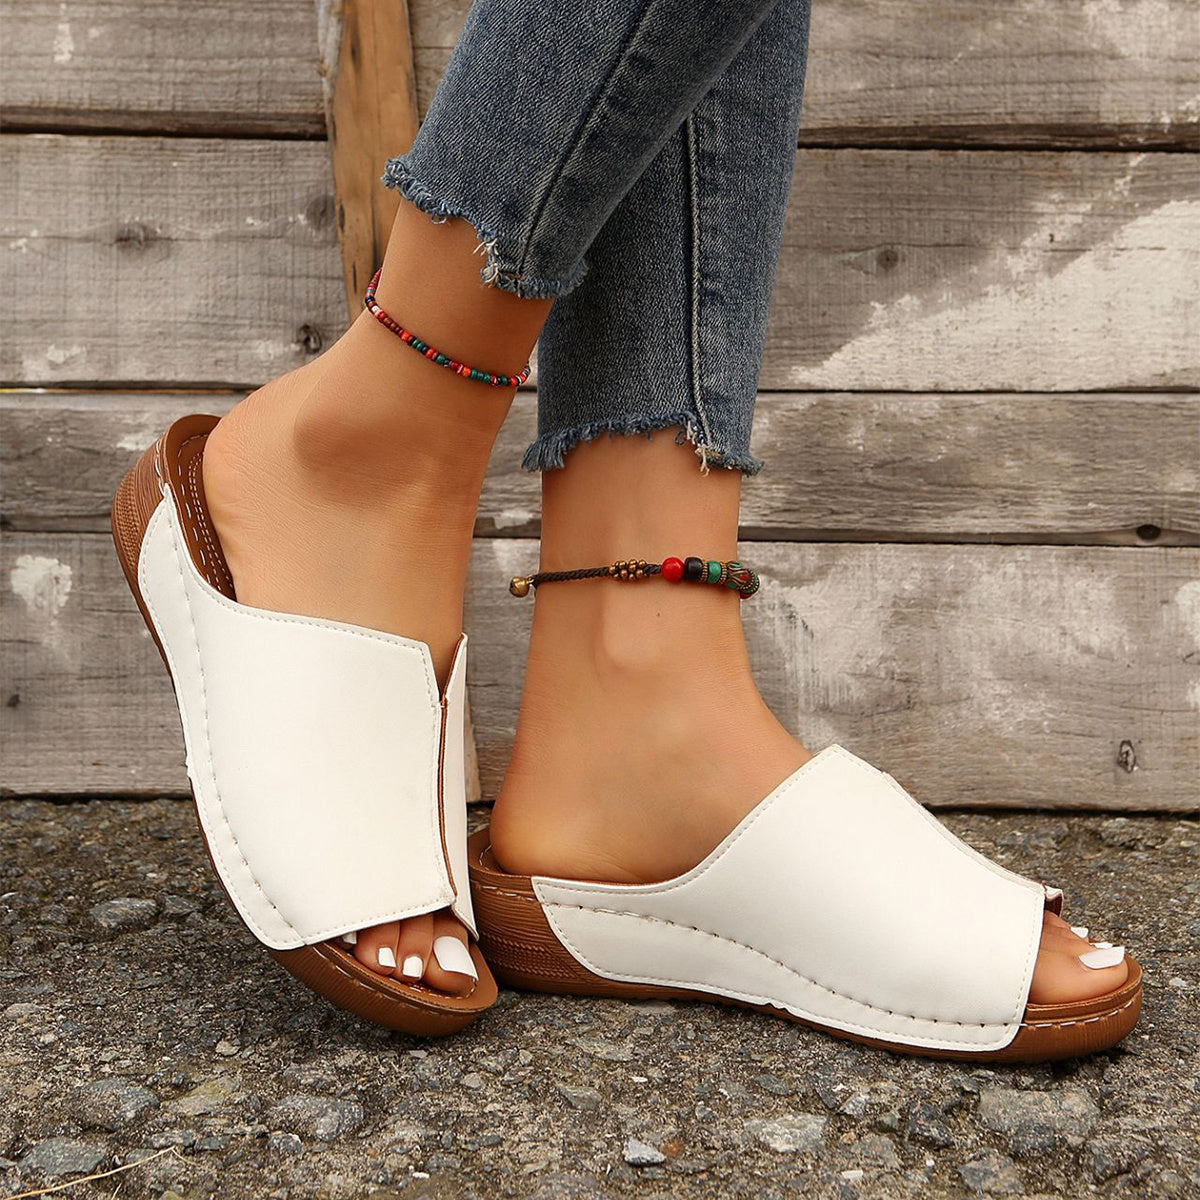 Fashion Solid Wedges Sandals Summer Casual Peep-toe Slippers Outdoor Thick Sole Heightening Slides Shoes Women